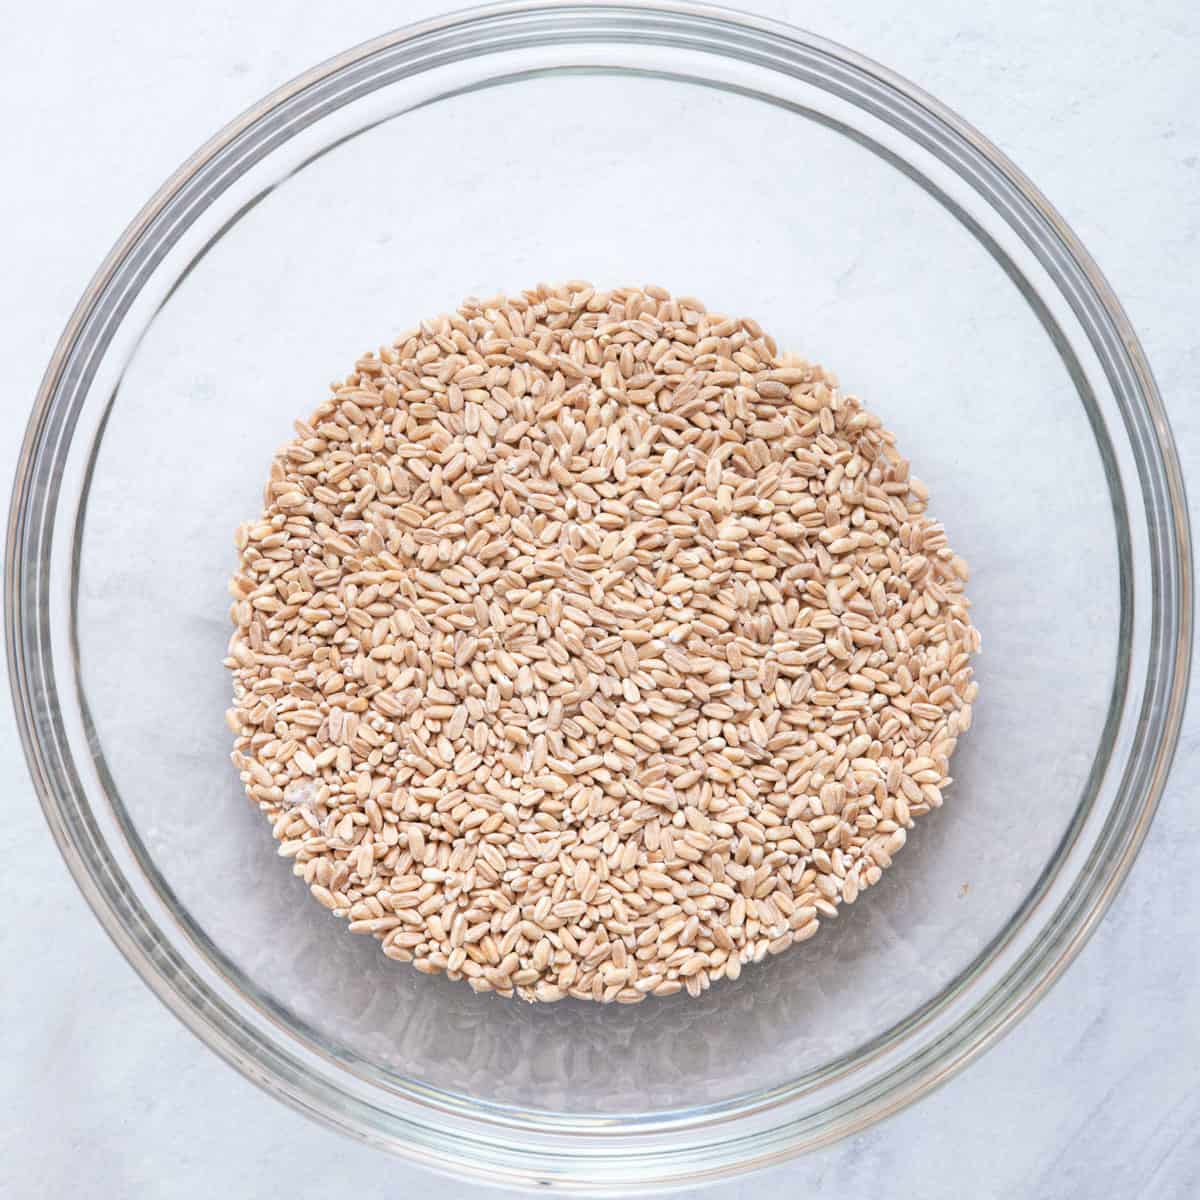 Uncooked farro in large glass bowl.